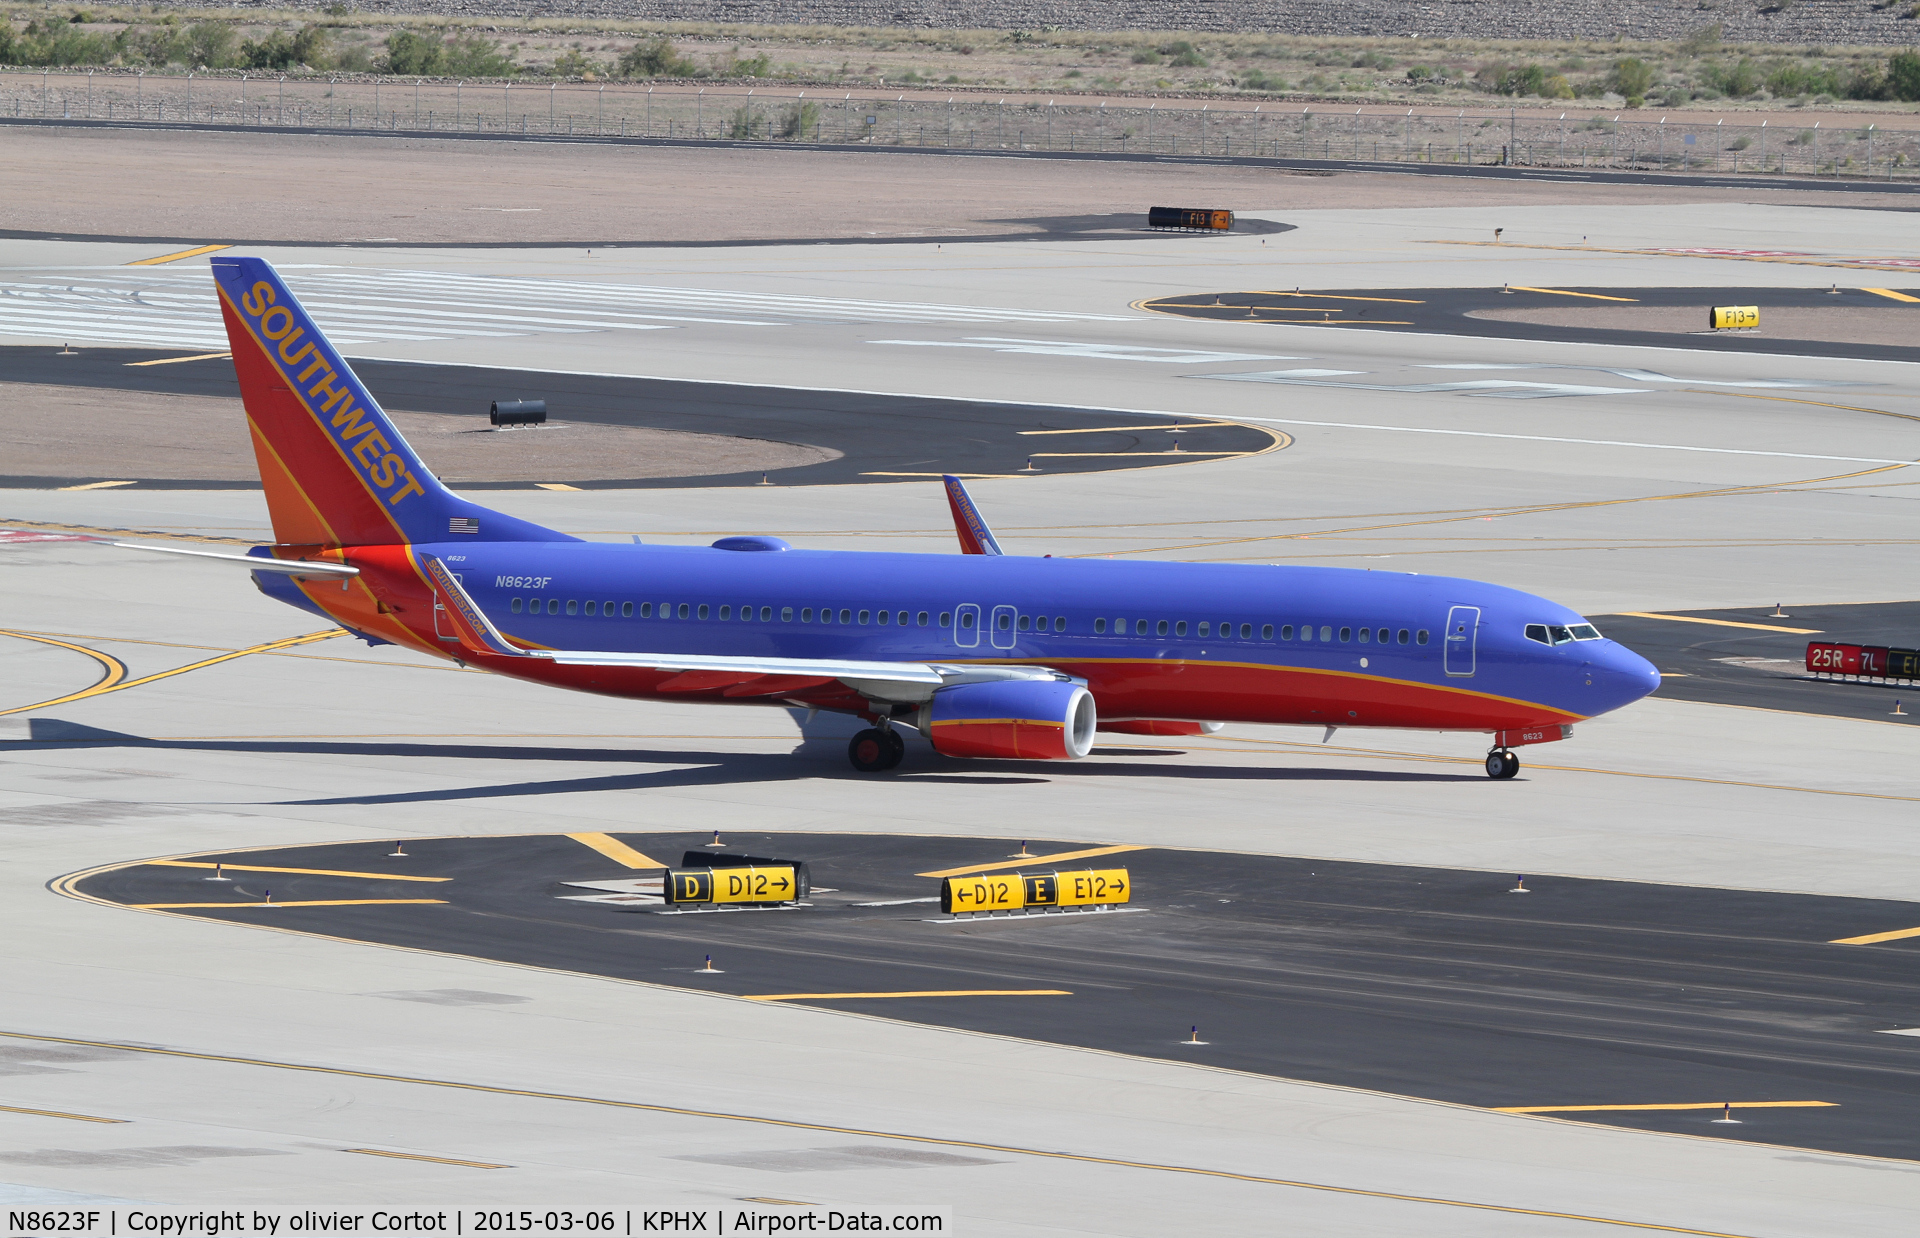 N8623F, 2013 Boeing 737-8H4 C/N 36731, going to the runway